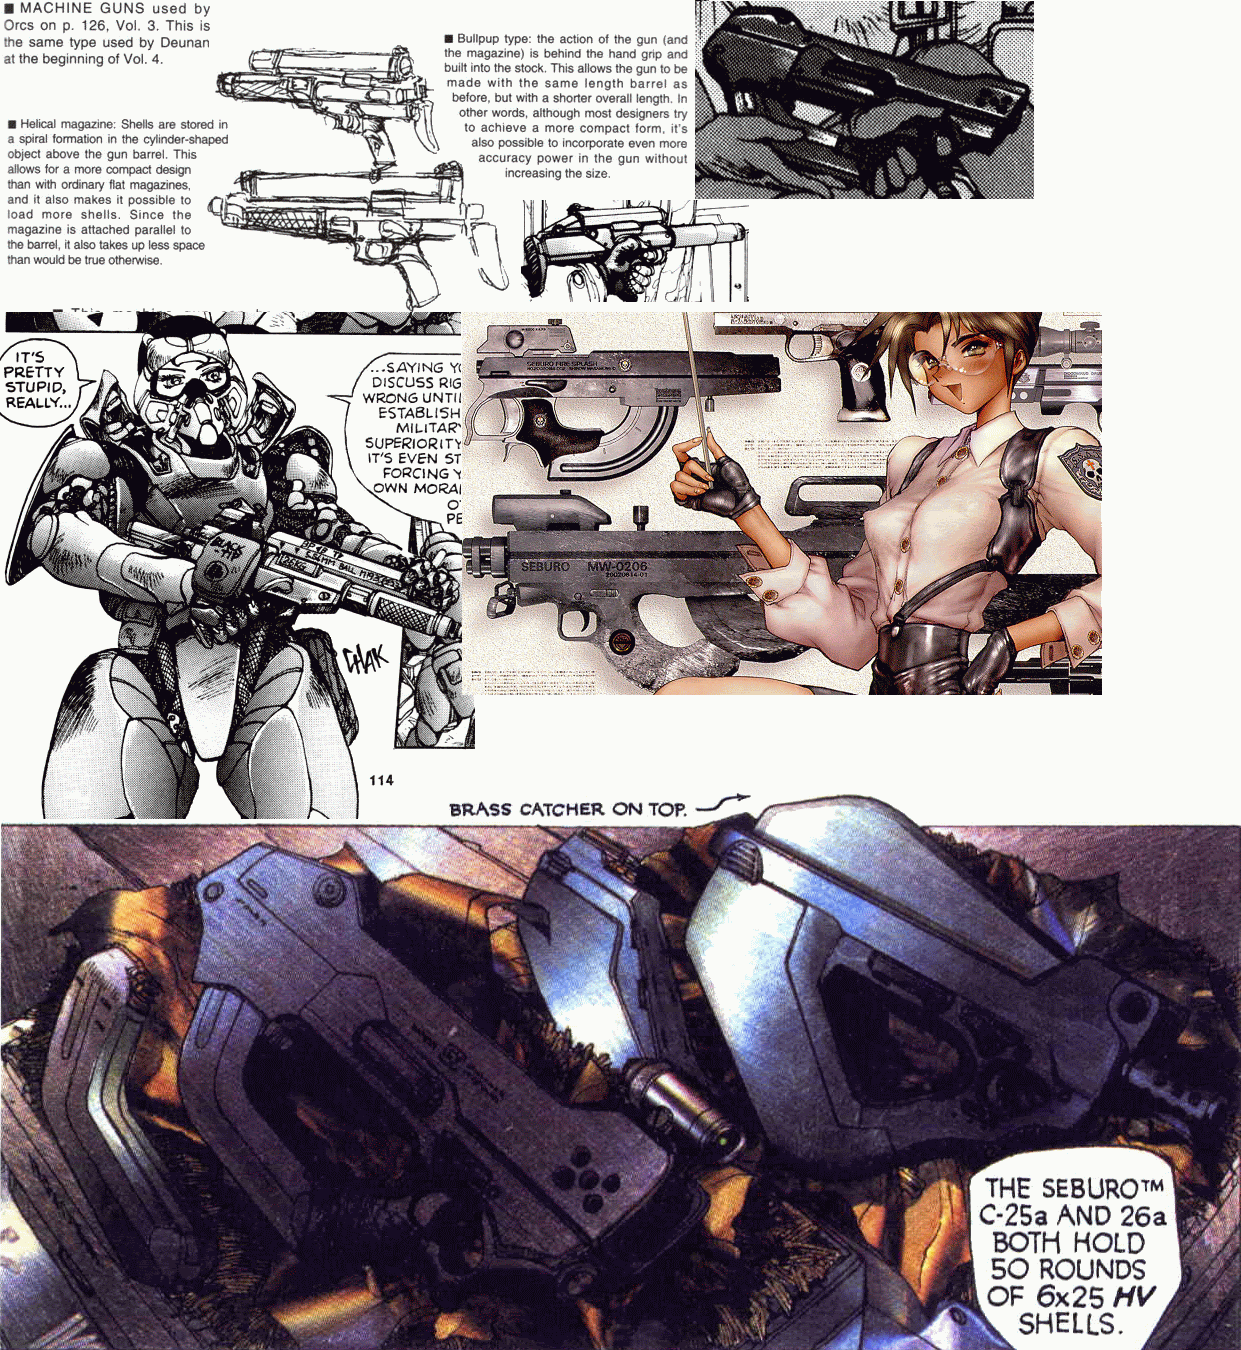 Lost Stories Character arts and details. Th_Shirow_guns00